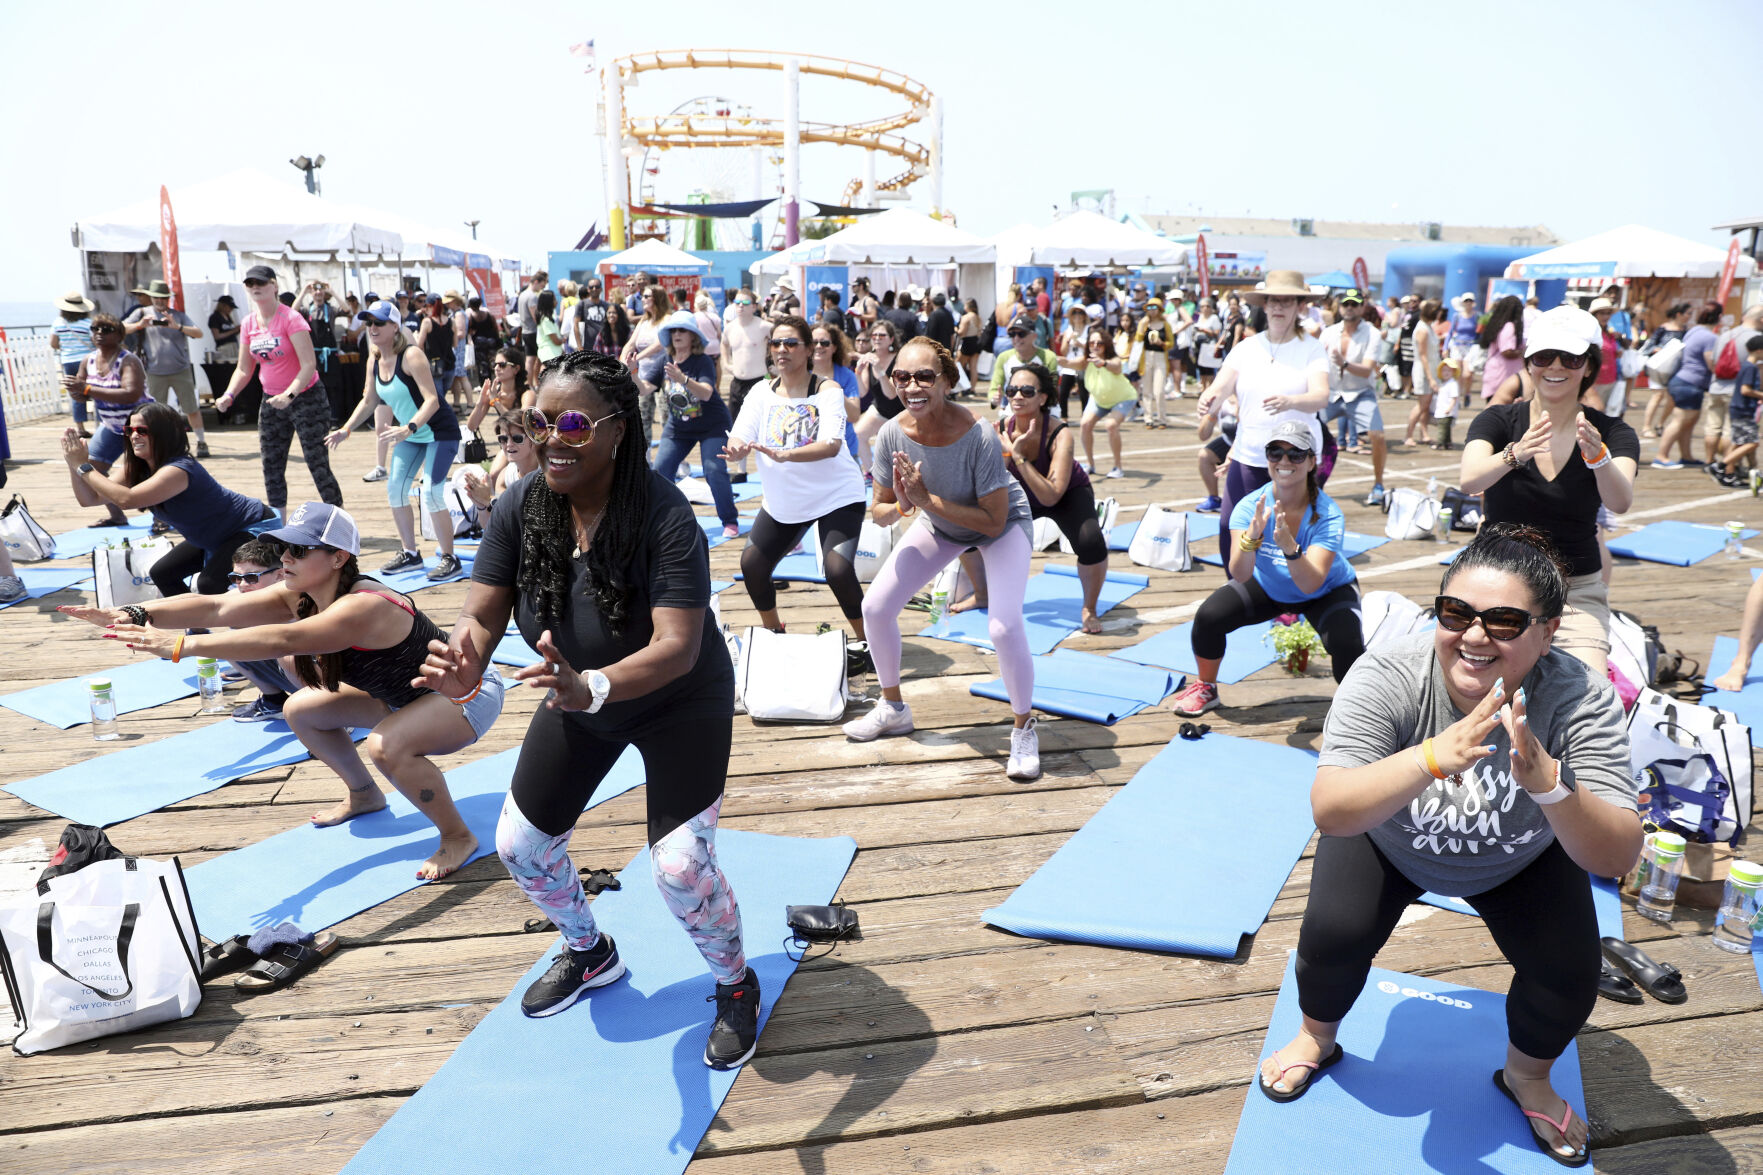 <p>IMAGE DISTRIBUTED FOR WEIGHT WATCHERS - At a WW GOOD wellness festival powered by Weight Watchers "WW" on the Santa Monica Pier on August 11, 2018, Los Angeles residents engage in a movement and meditation series ("LIFTED") led by Celebrity Fitness Instructor Holly Rilinger. WW International, better known as WeightWatchers, is buying telehealth platform Sequence, giving its members access to a program that offers prescriptions to obesity medications. Shares of WW International Inc. jumped nearly 12% before the market open on Tuesday, March 7, 2023. (Matt Sayles/AP Images for Weight Watchers)</p>   PHOTO CREDIT: Matt Sayles 